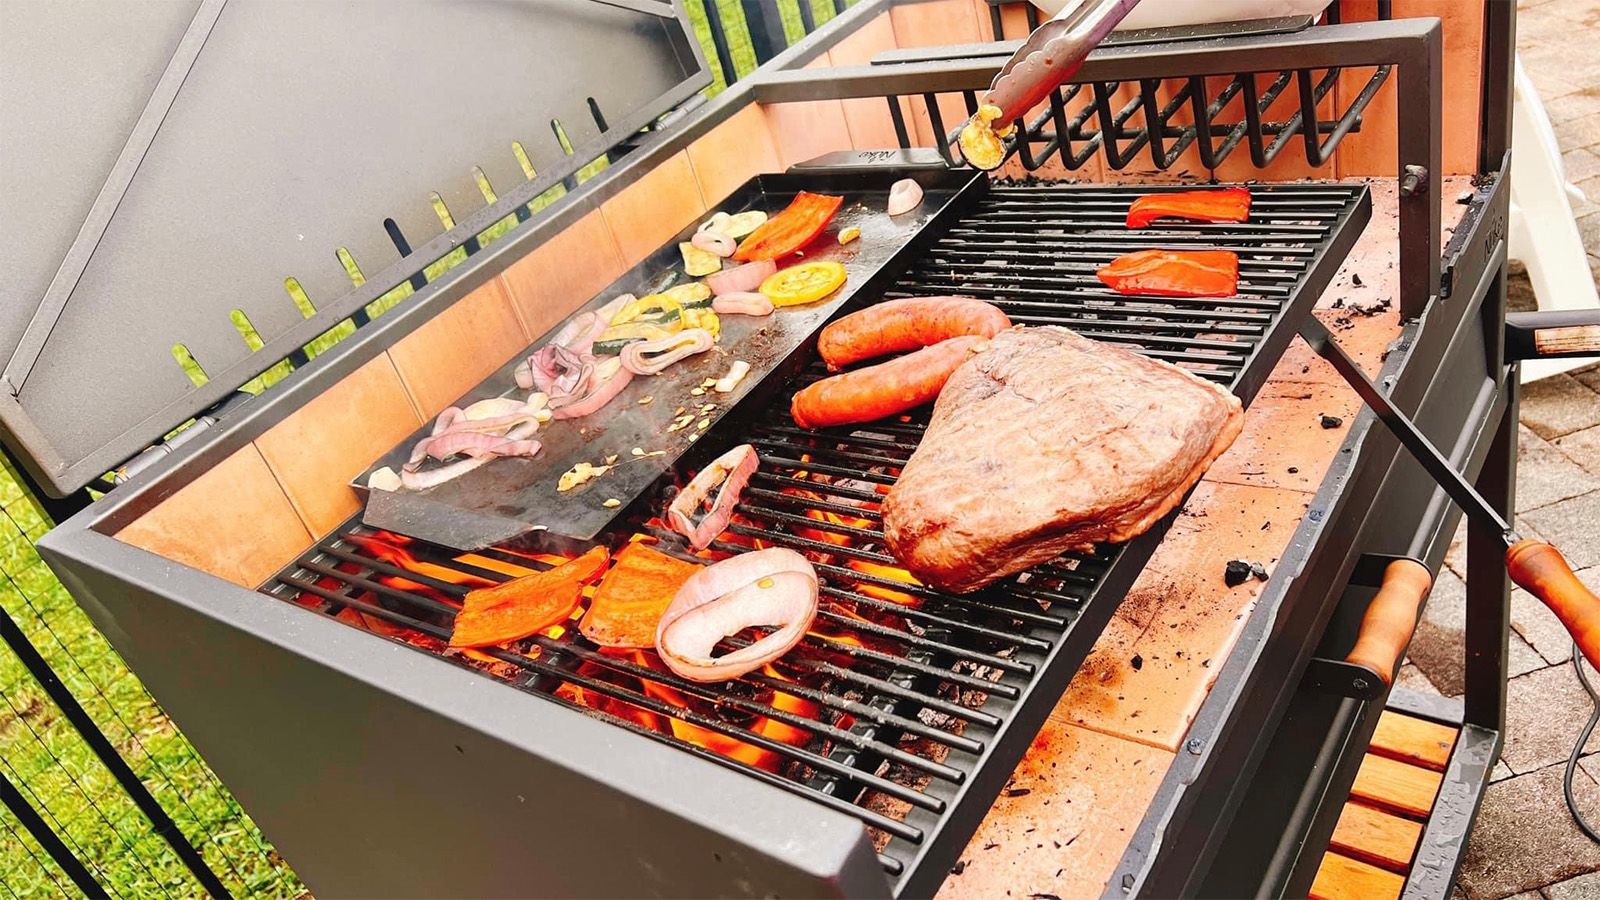 The Best Barbecue Grills & Smokers - Buying Guides & Reviews